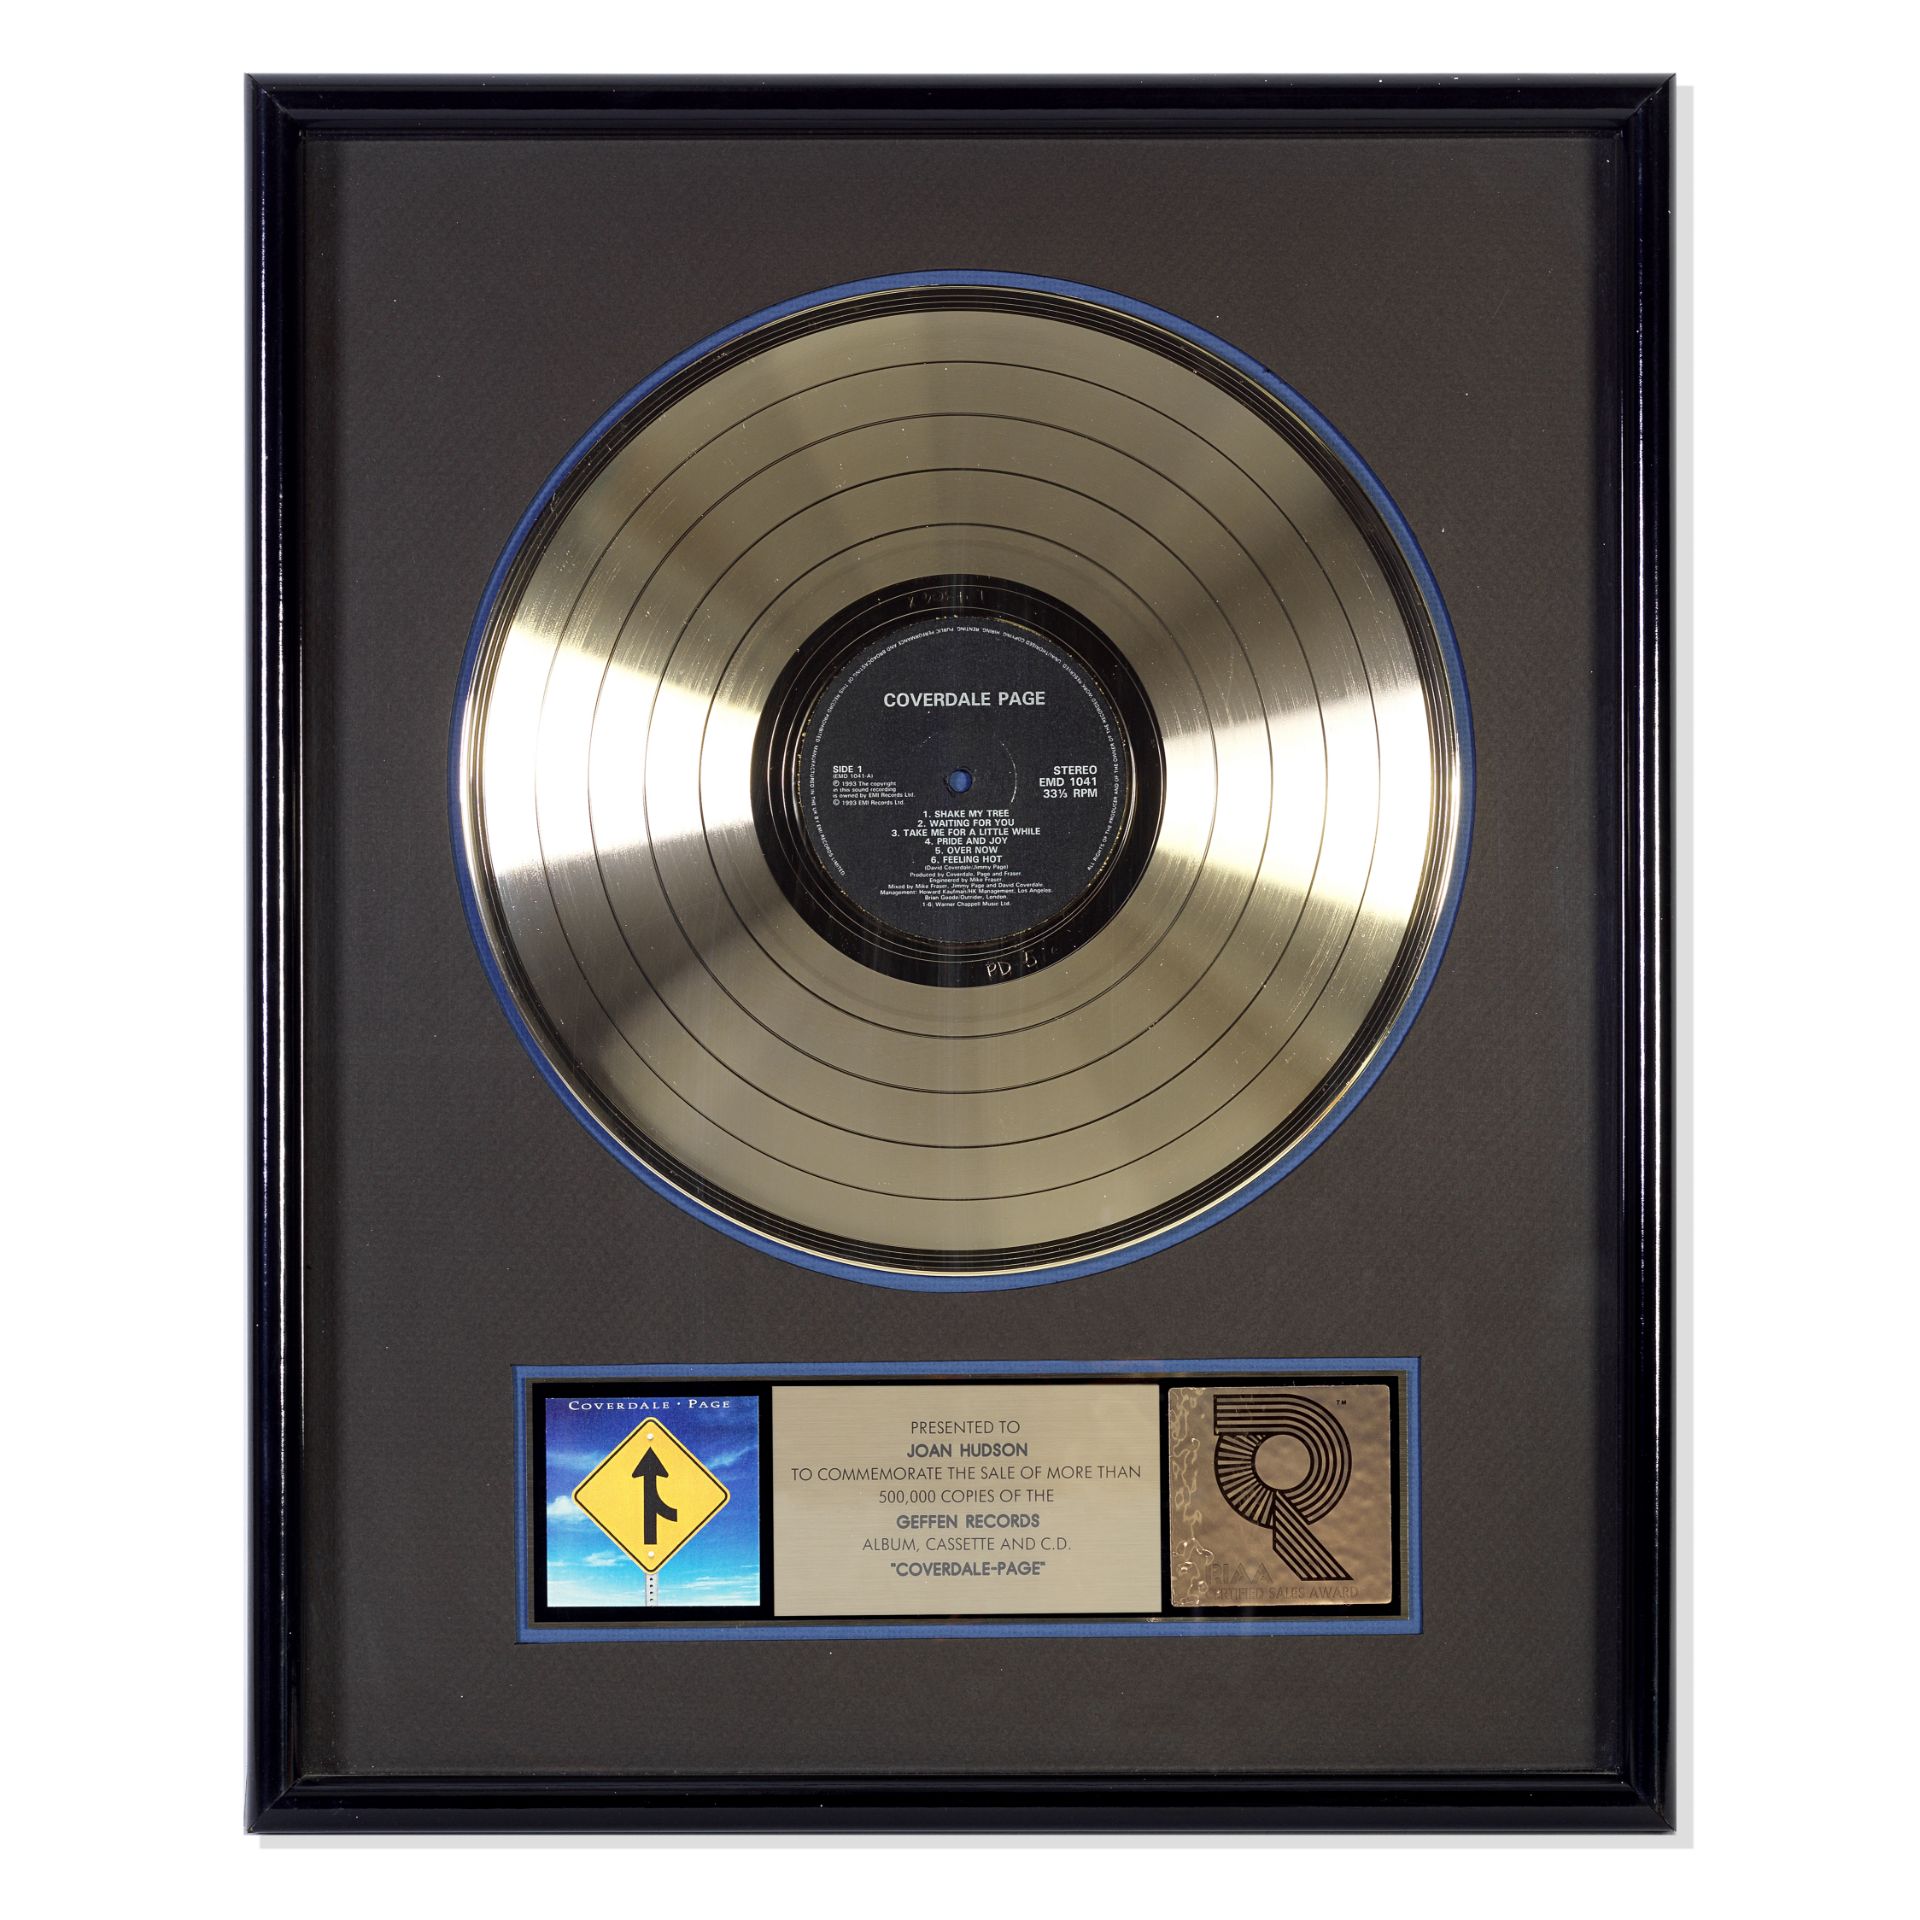 Jimmy Page/David Coverdale: A RIAA 'Gold' Disc Award For The Album Coverdale-Page, 1993,